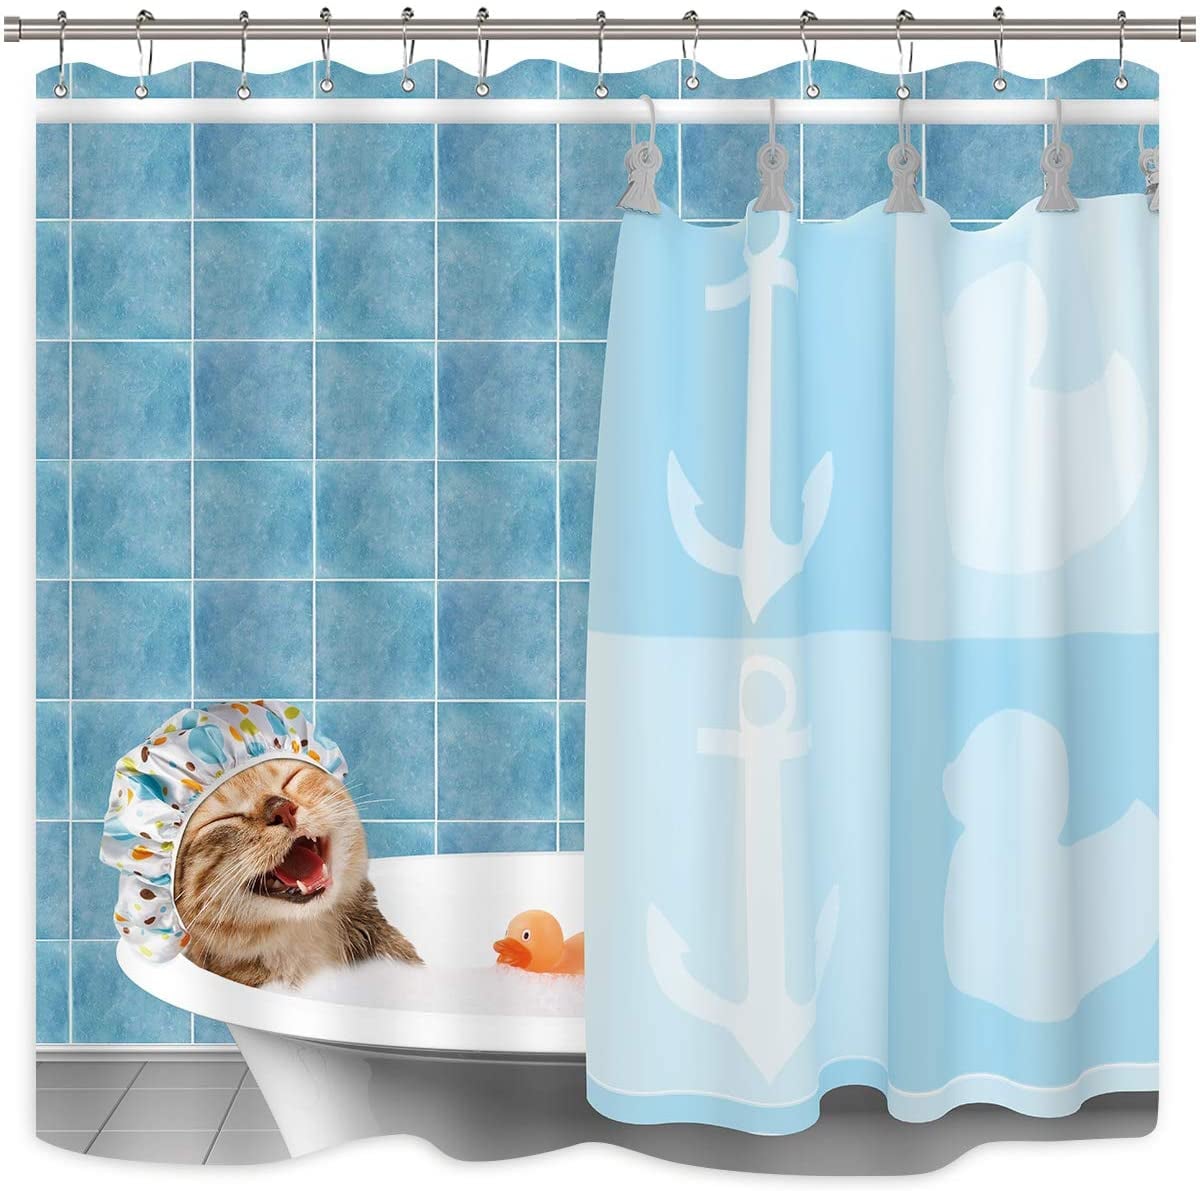 Funny and Weird Shower Curtains on Amazon | POPSUGAR Home